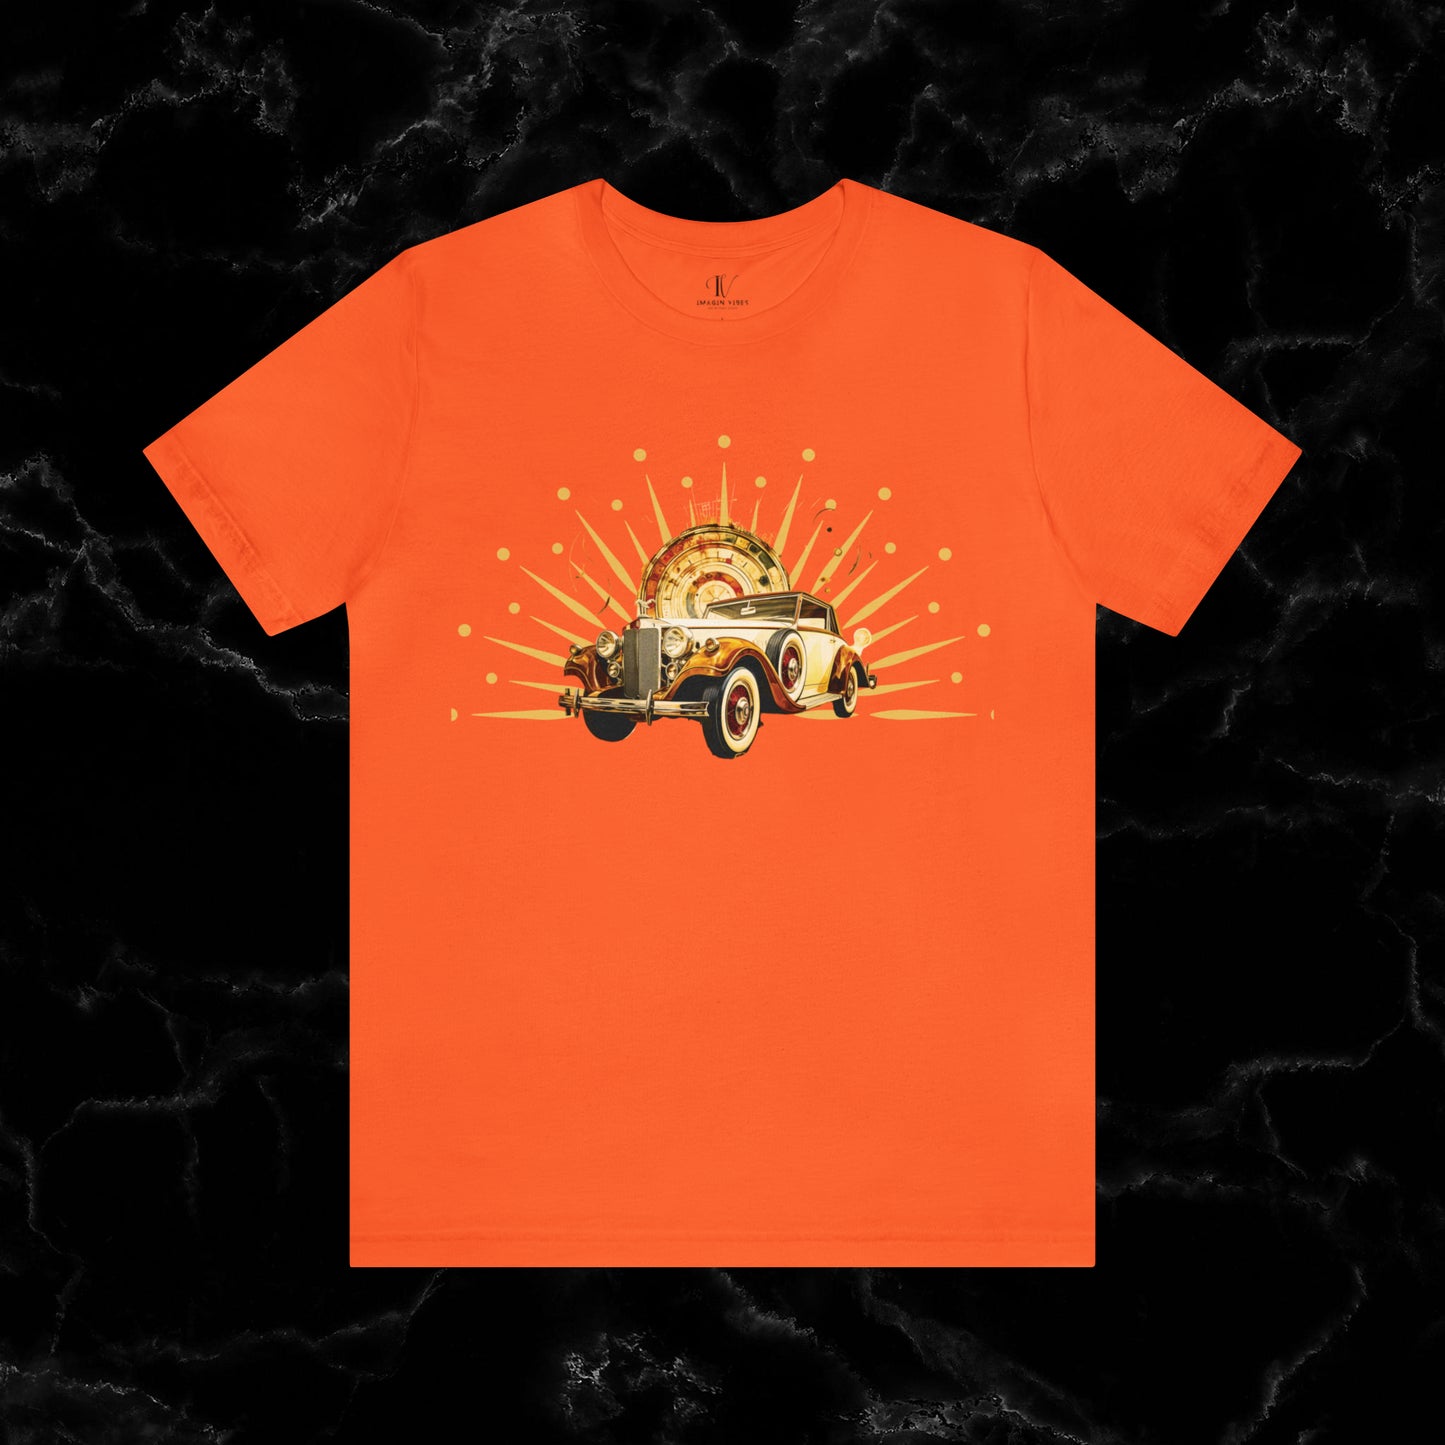 Vintage Car Enthusiast T-Shirt with Classic Wheels and Timeless Appeal Nostalgic T-Shirt Orange S 